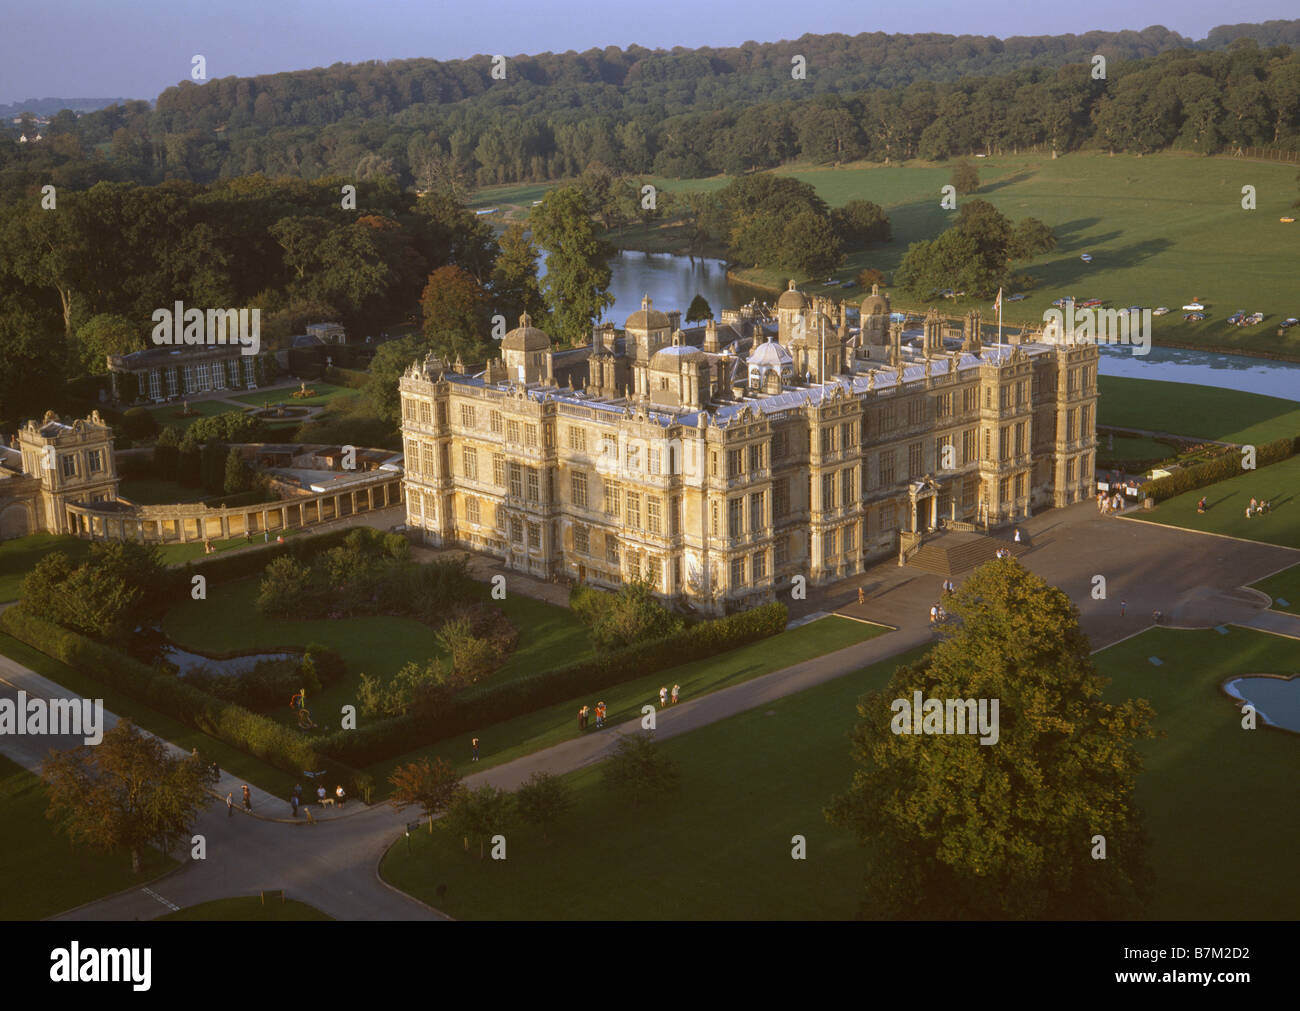 Longleat House Wiltshire built by Sir John Thynne completed 1580 Aerial view from a hot air balloon Stock Photo